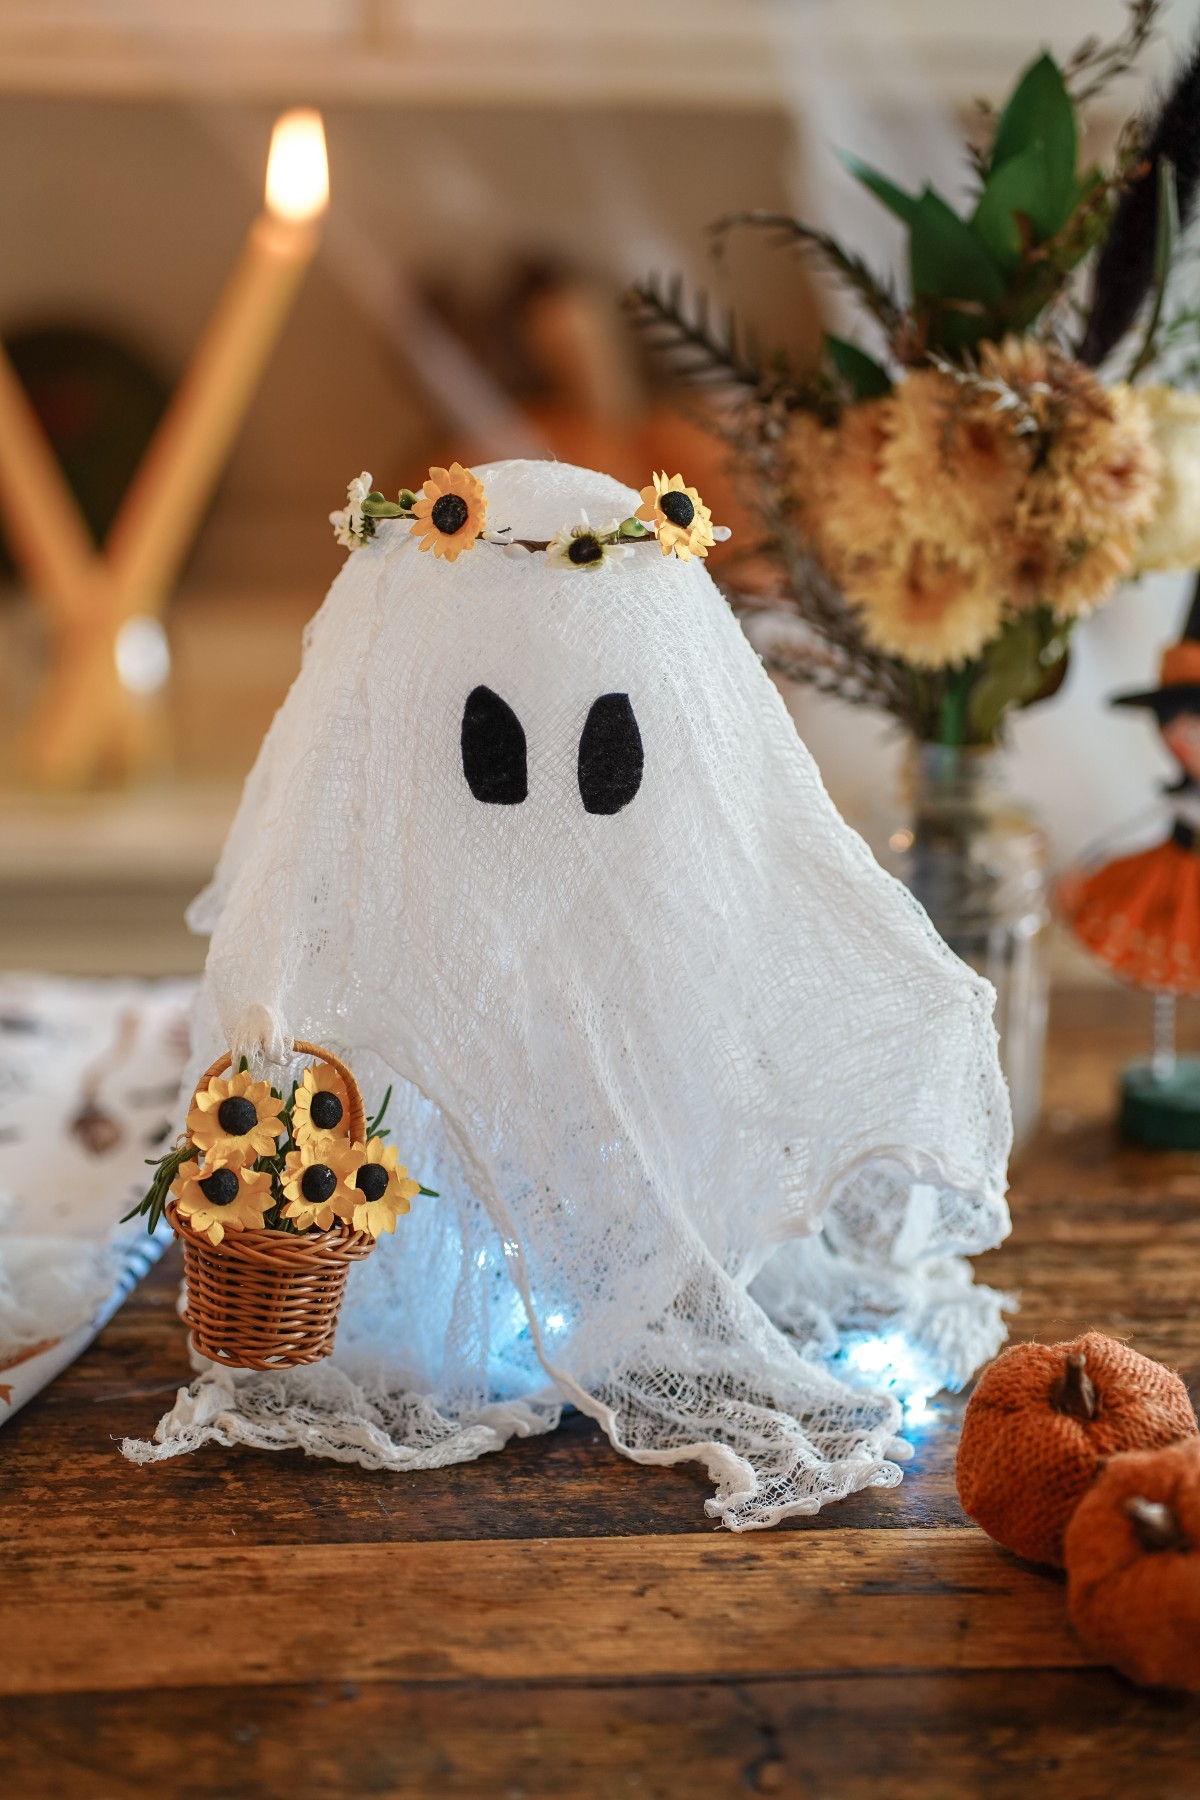 Halloween cheesecloth ghost standing on a table holding a basket of flowers